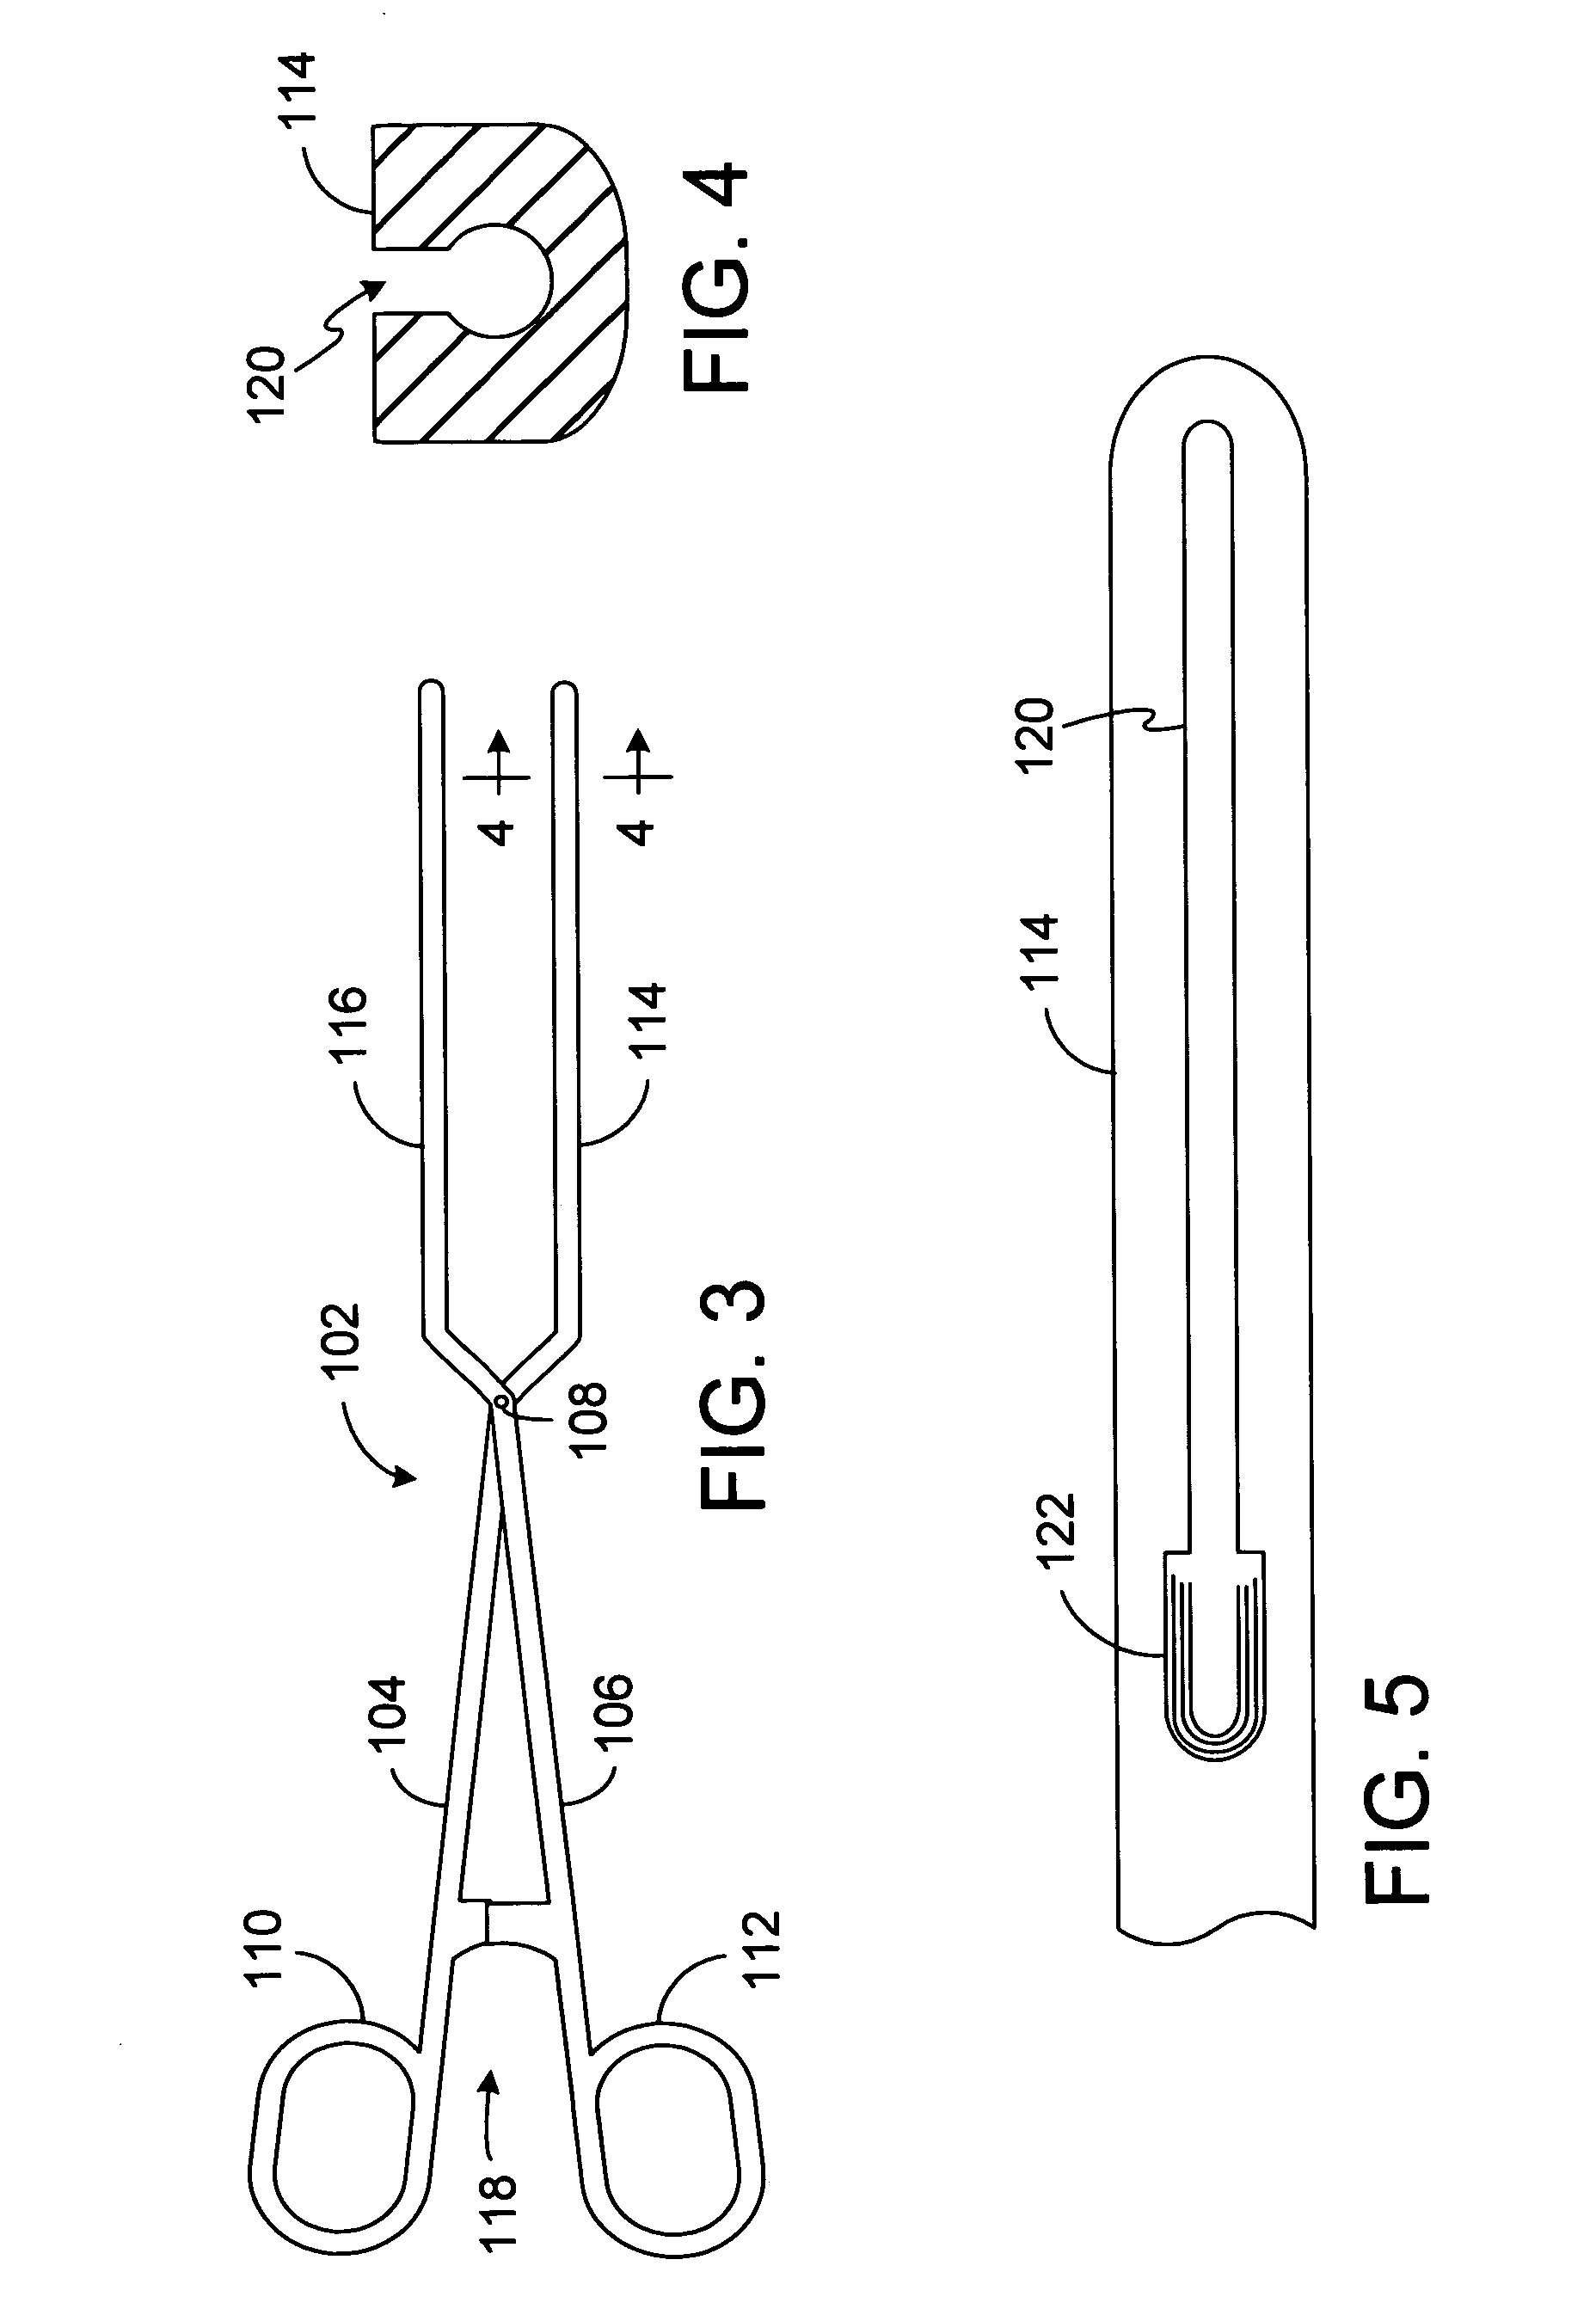 Clamp based lesion formation apparatus with variable spacing structures